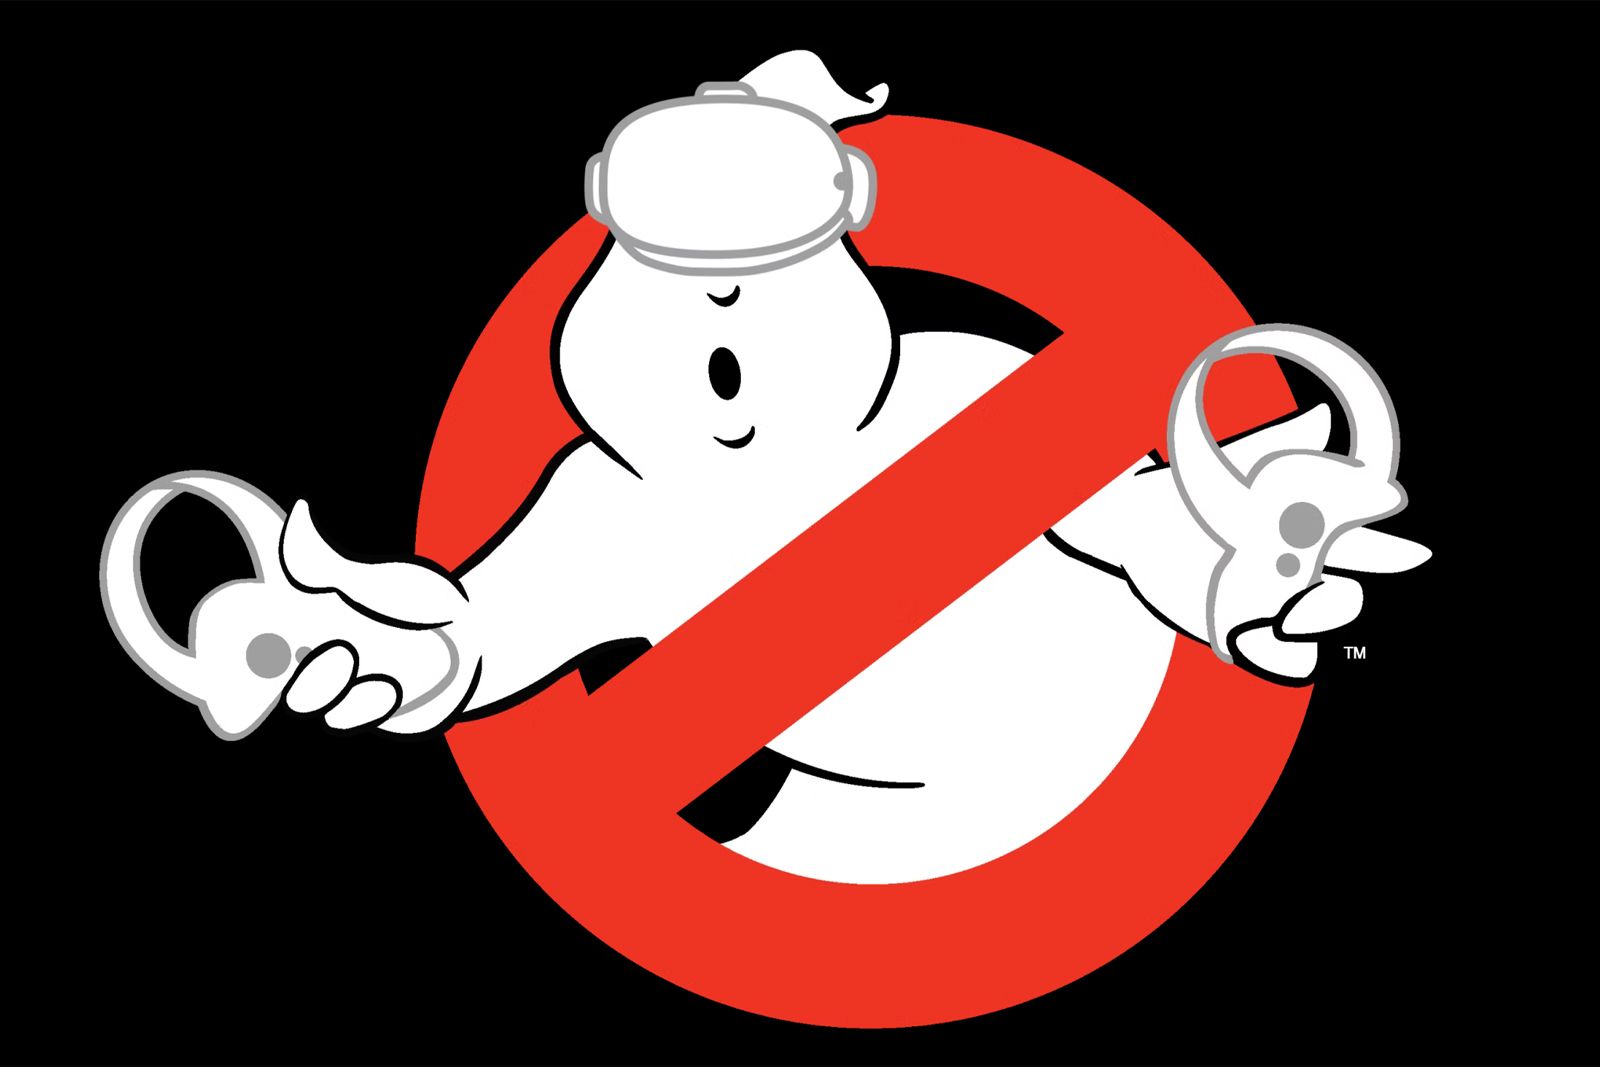 There's a Ghostbusters VR multiplayer game coming to Meta Quest 2 photo 1